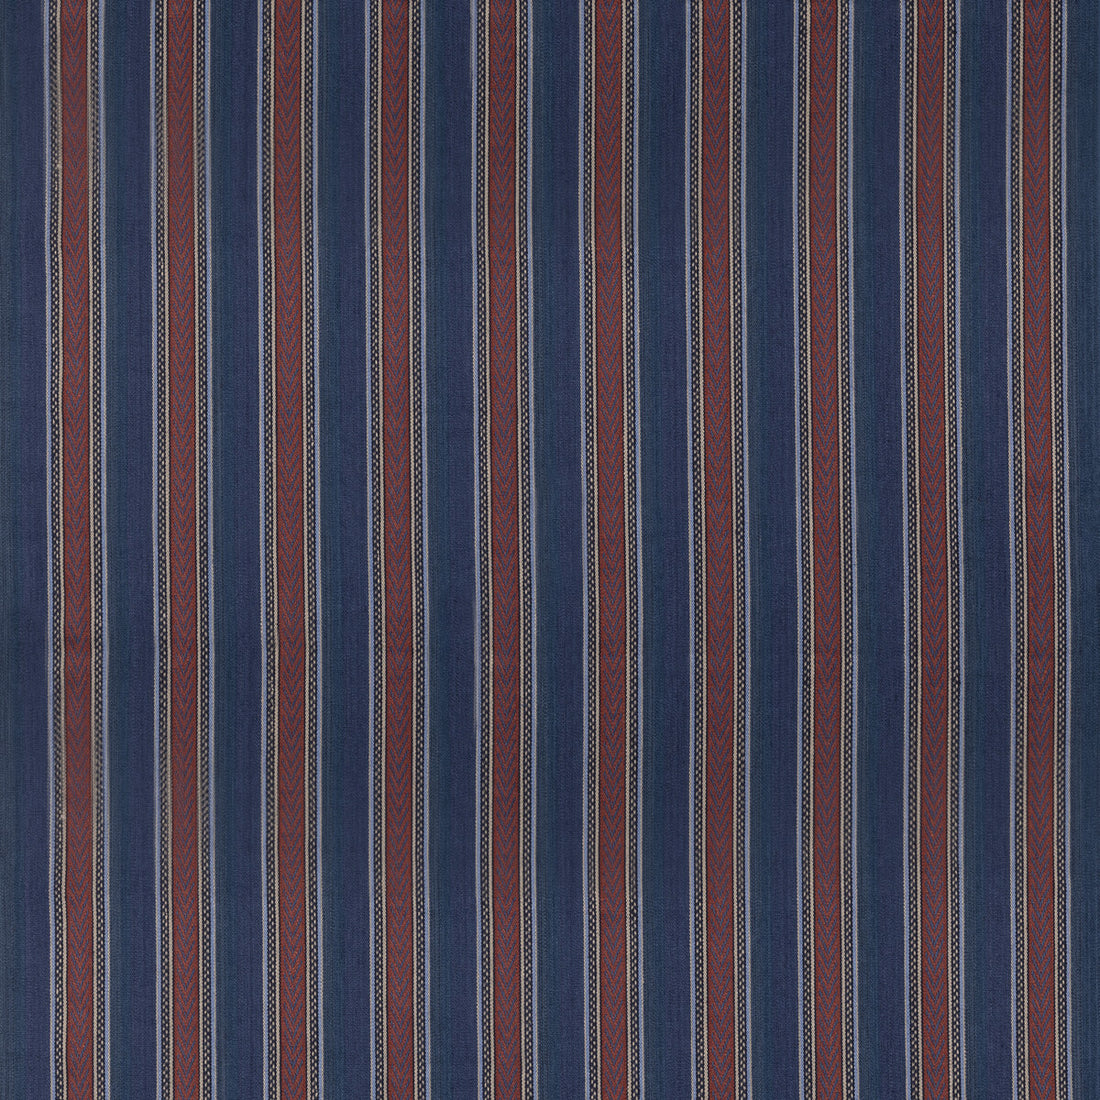 Barrington Stripe fabric in indigo/red color - pattern FD826.G103.0 - by Mulberry in the Westerly Stripes collection